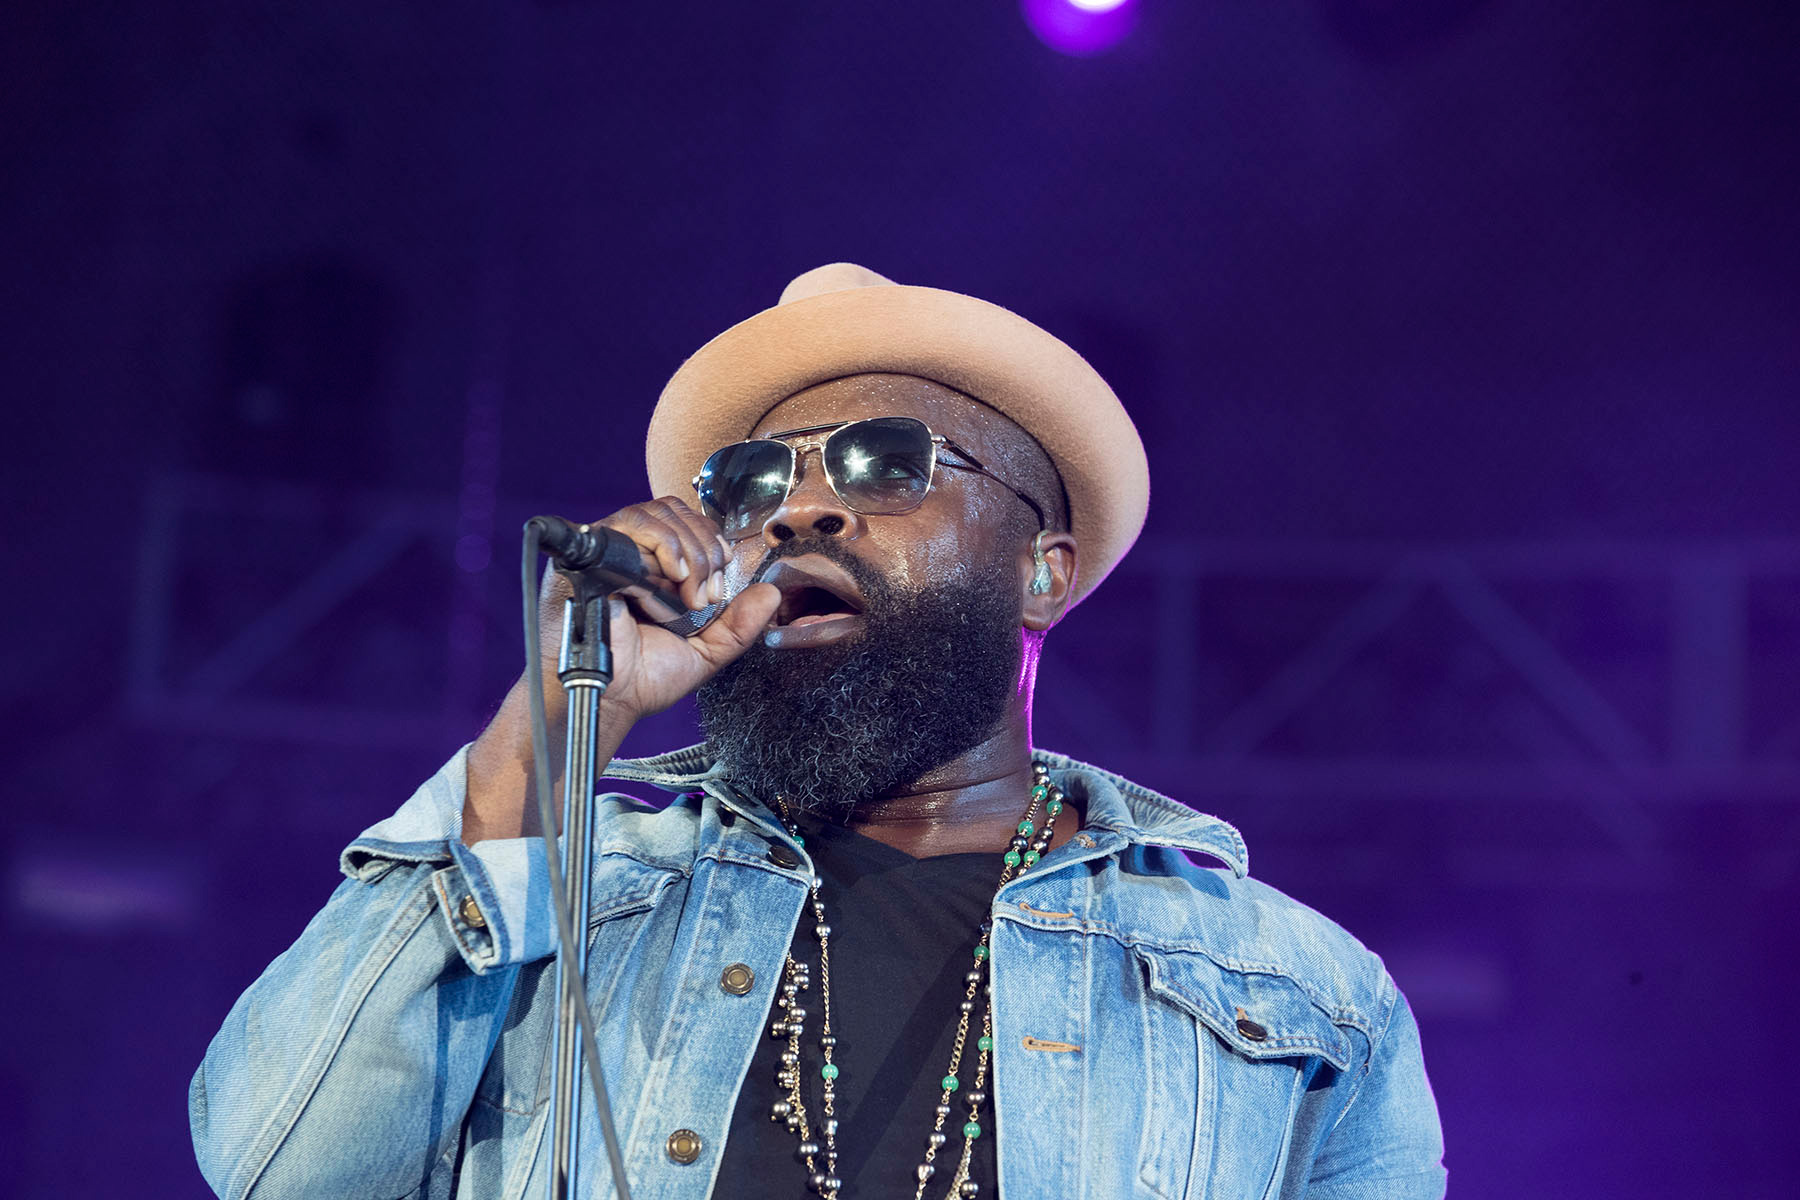 Tariq "Black Thought" Trotter of The Roots electrified the crowd with a high-energy hip hop ensemble that came complete with a tuba player.